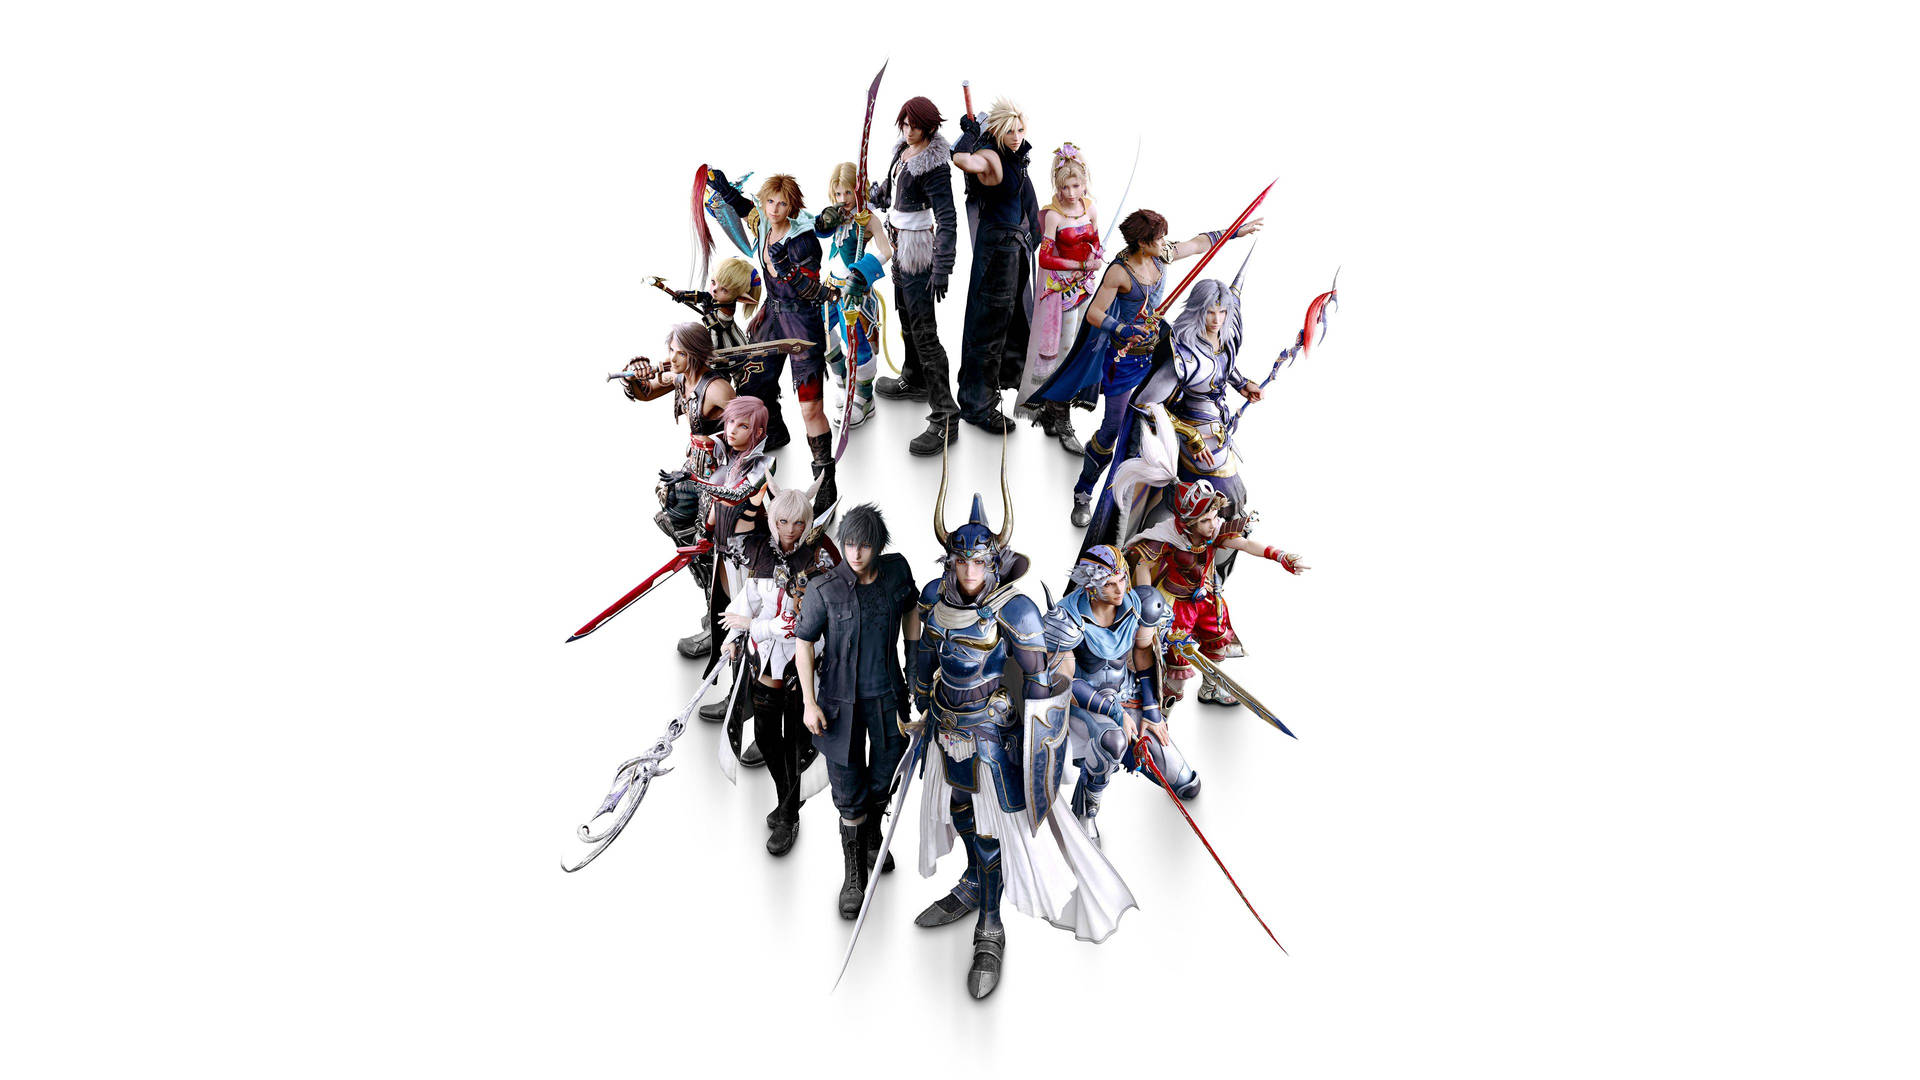 Dissidia Final Fantasy 4k Wallpaper Now Available – Square